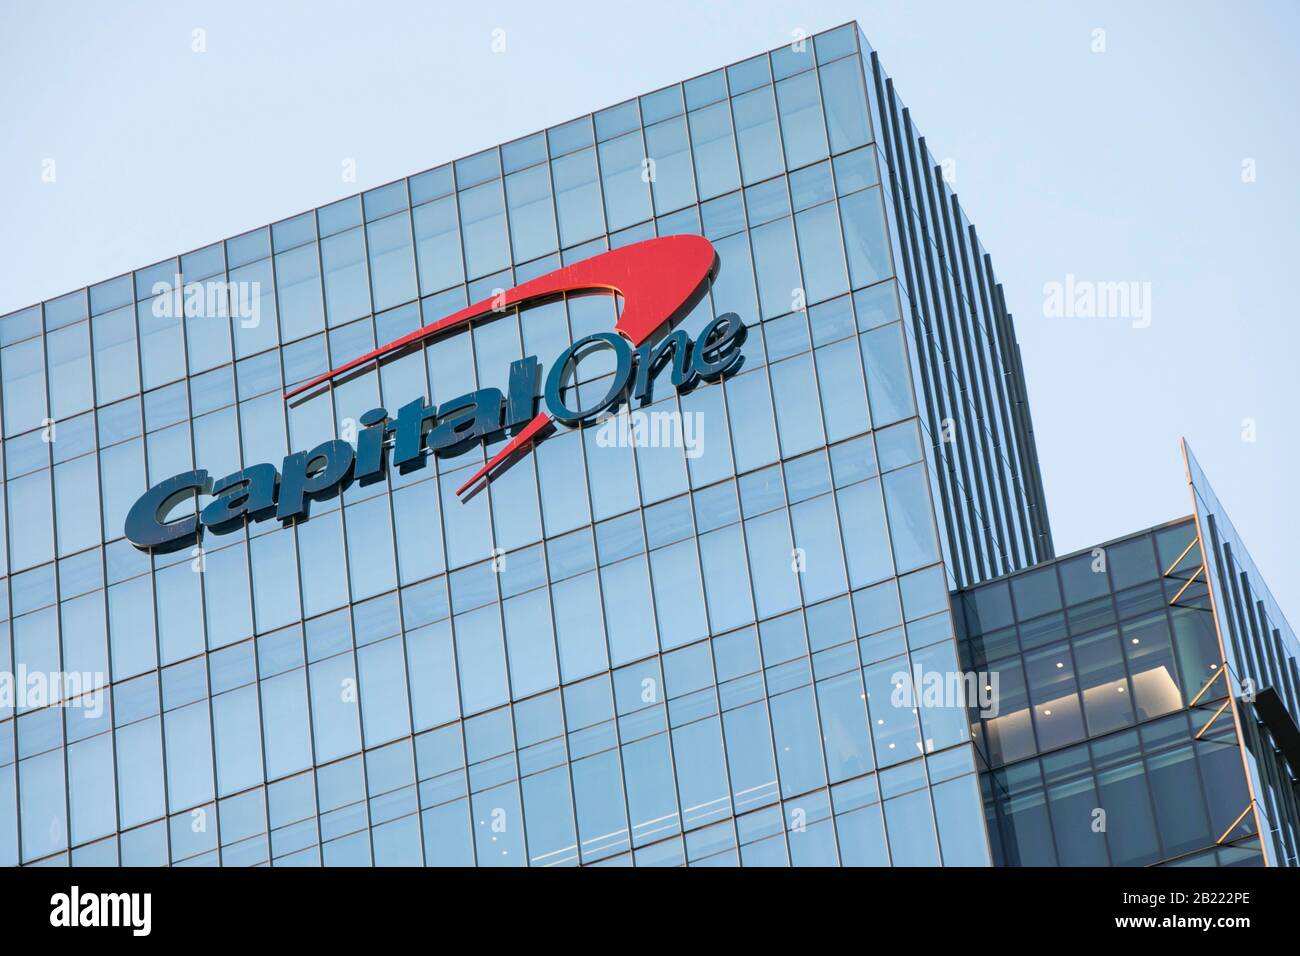 A logo sign outside of the headquarters of Capital One Financial Corporation (Bank) in McLean, Virginia, on February 23, 2020. Stock Photo